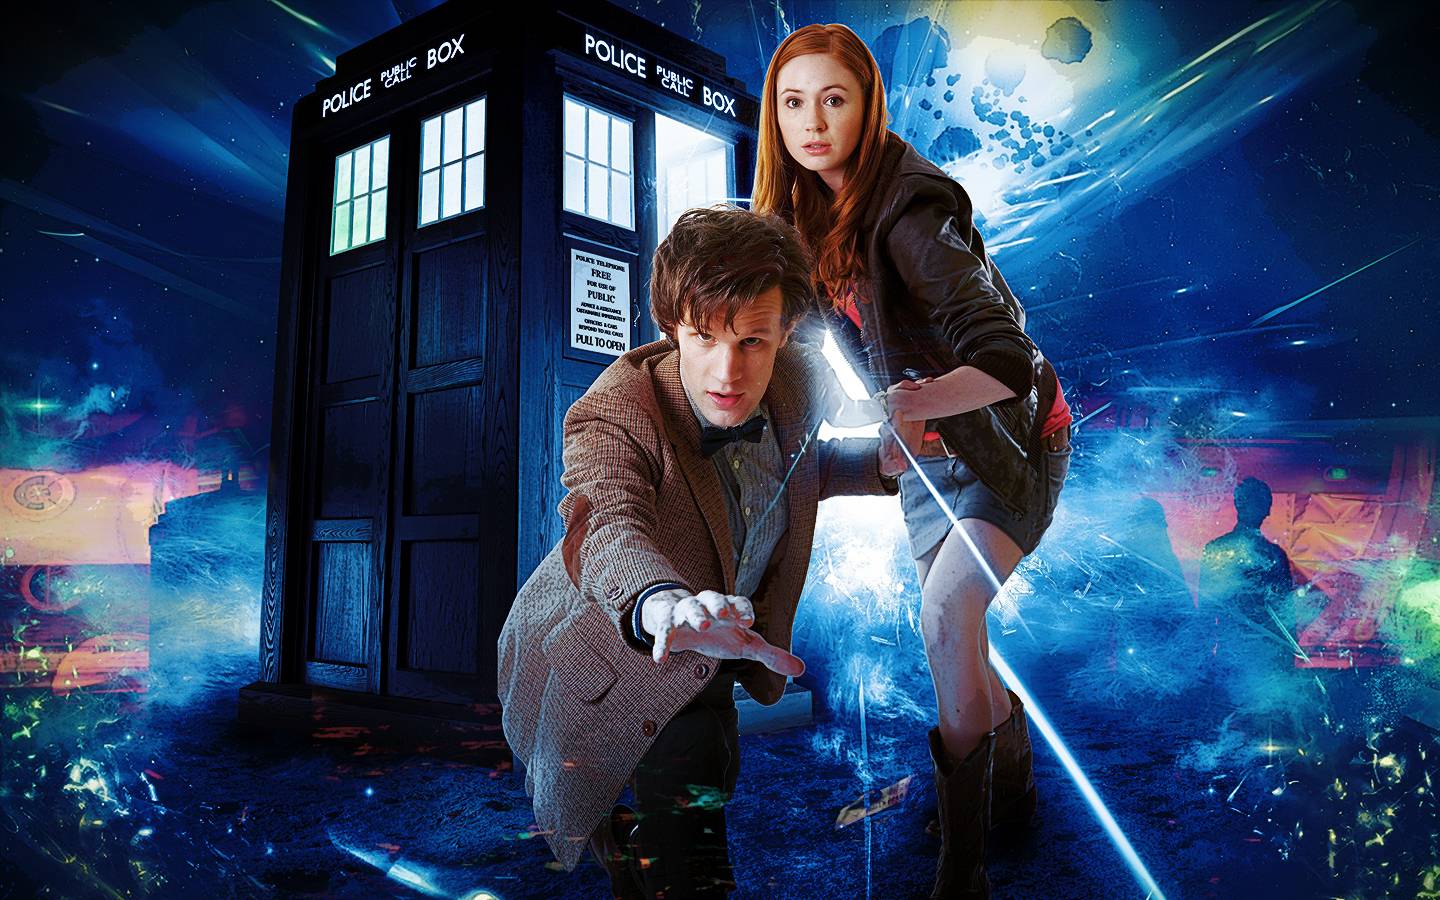 HD doctor who wallpaper iphone / Wallpaper Database